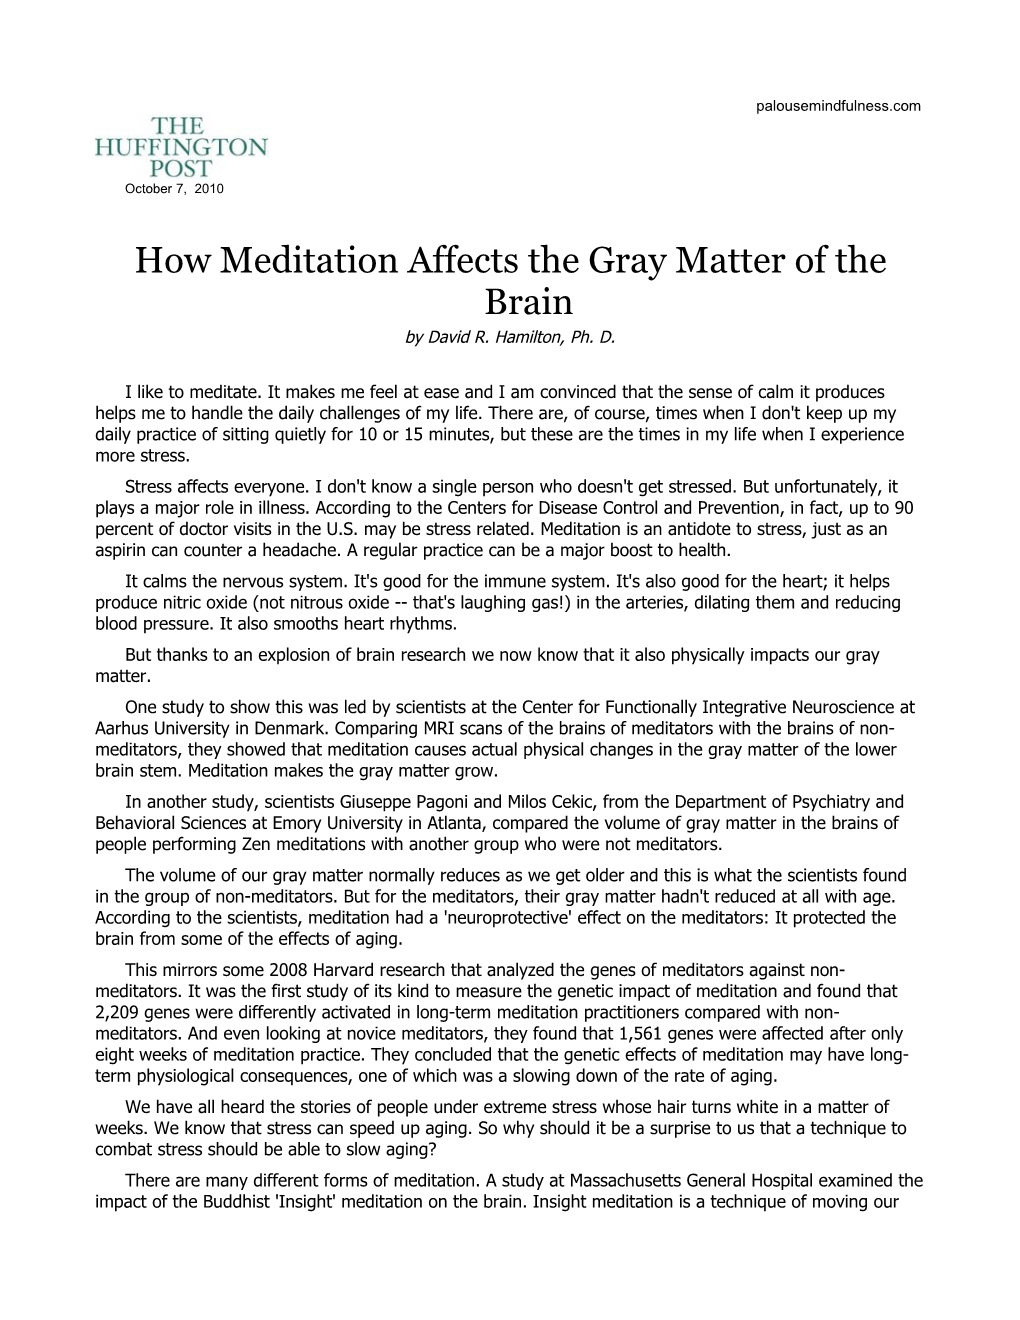 How Meditation Affects the Gray Matter of the Brain